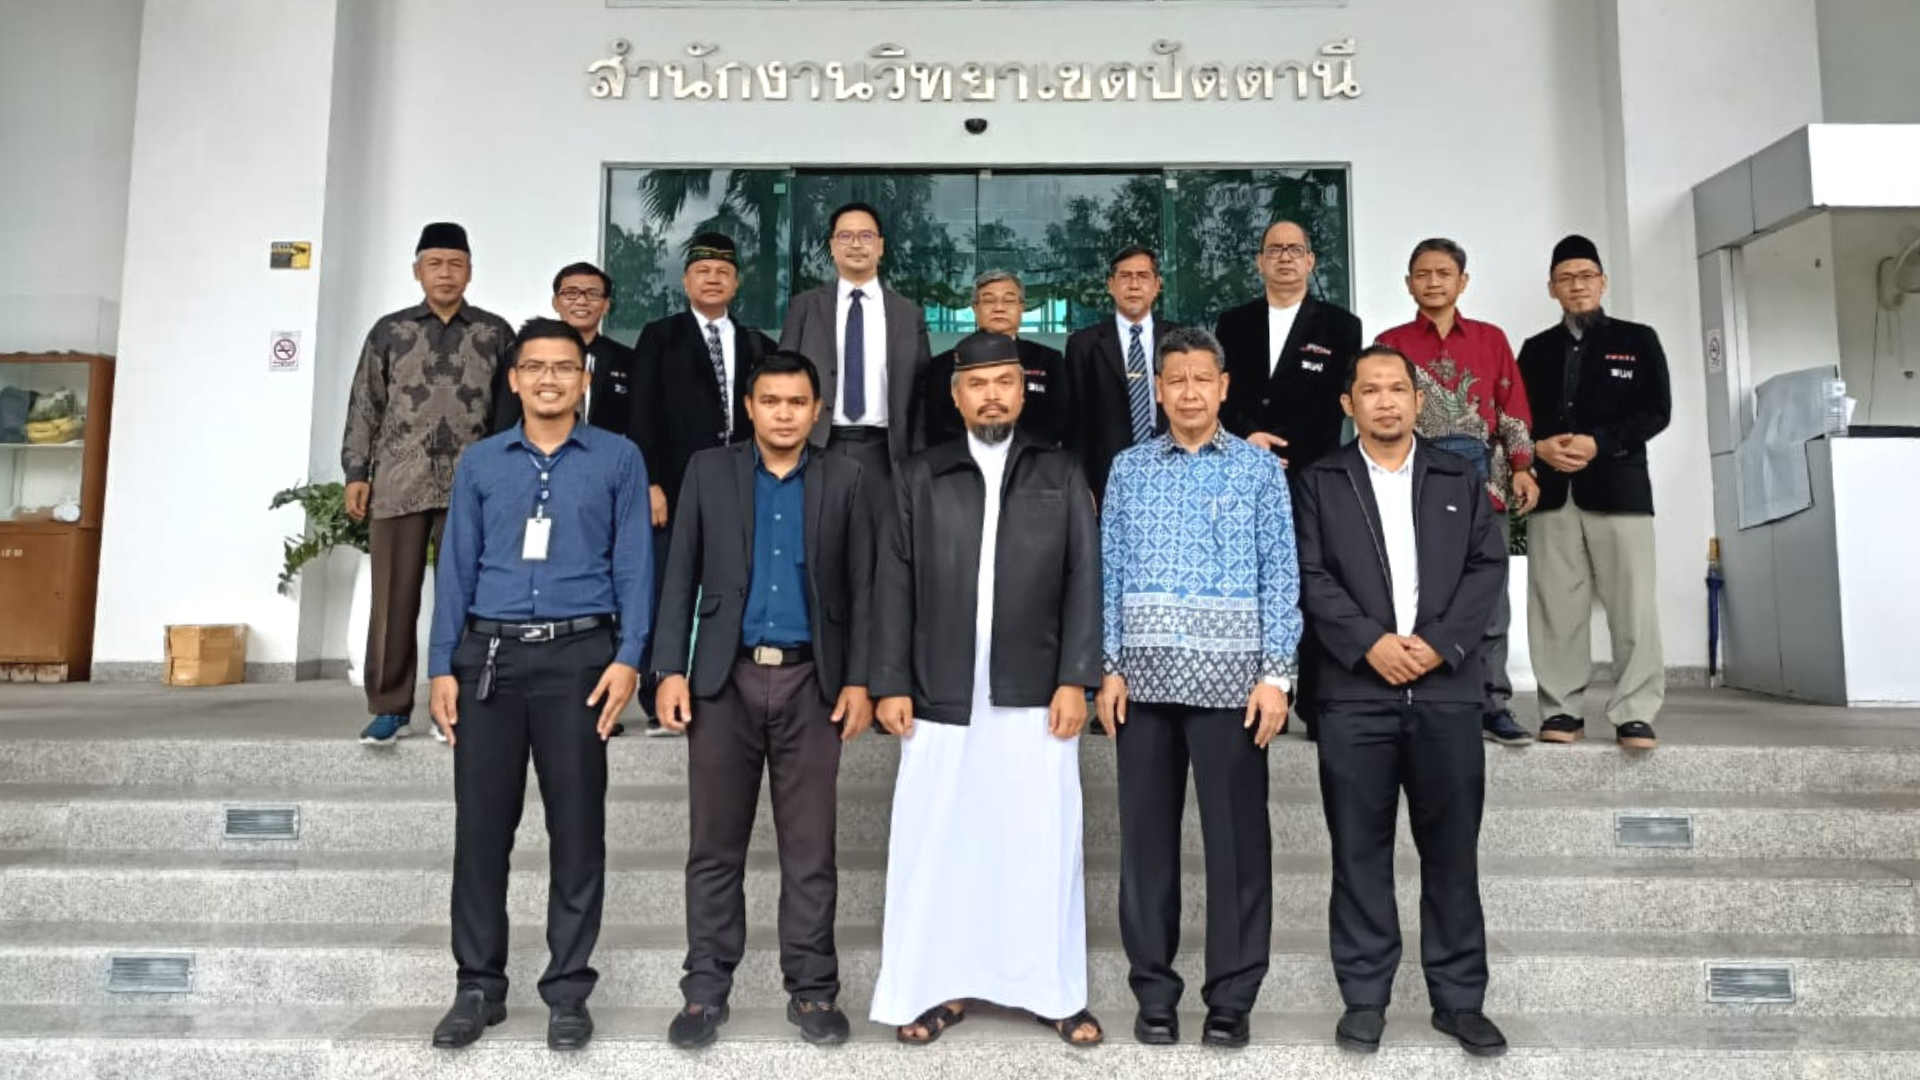 From MoA to MoU, UAI Visited PSU for Strengthen Their Strategic Partnership